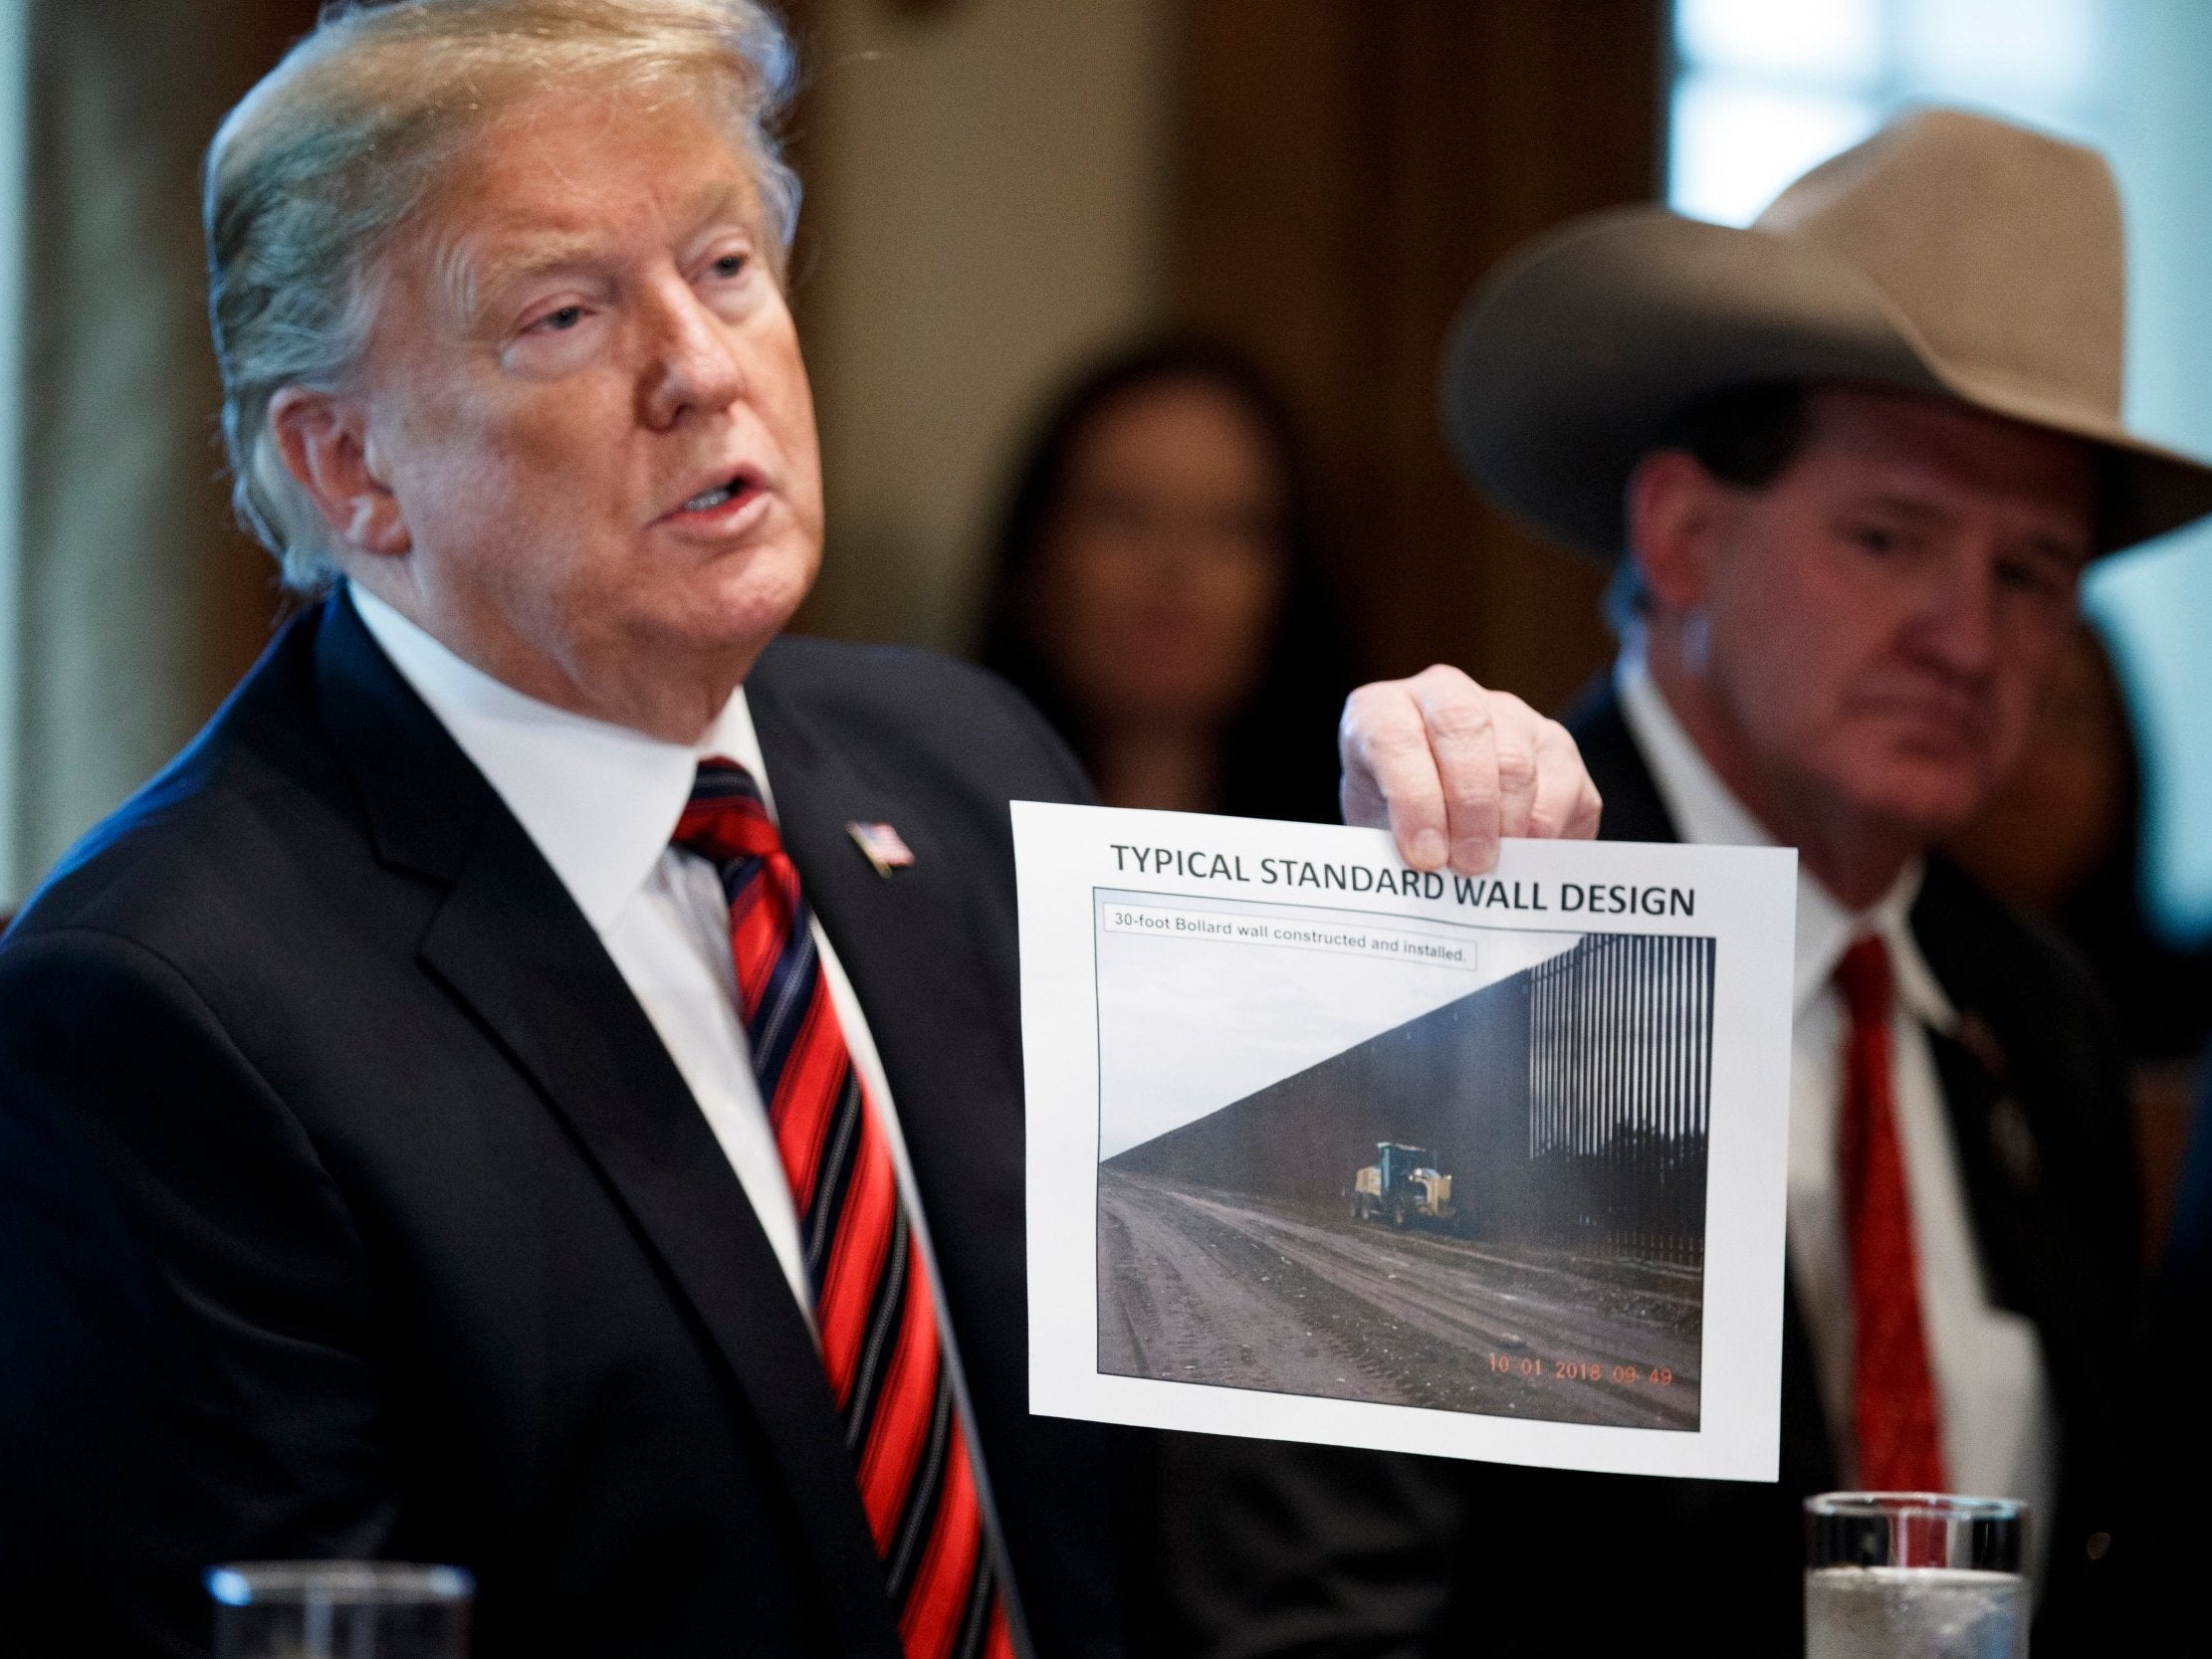 Donald Trump shows an image of the wall design during a White House meeting on Friday